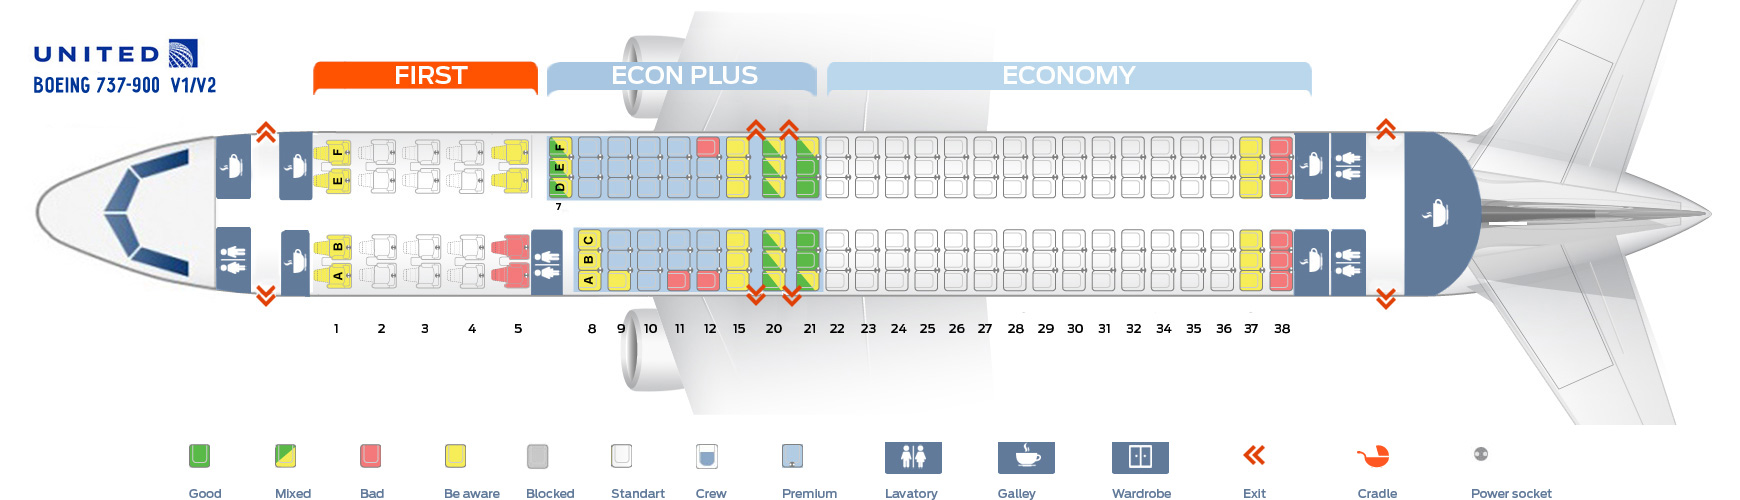 Copa Airlines Seating Chart